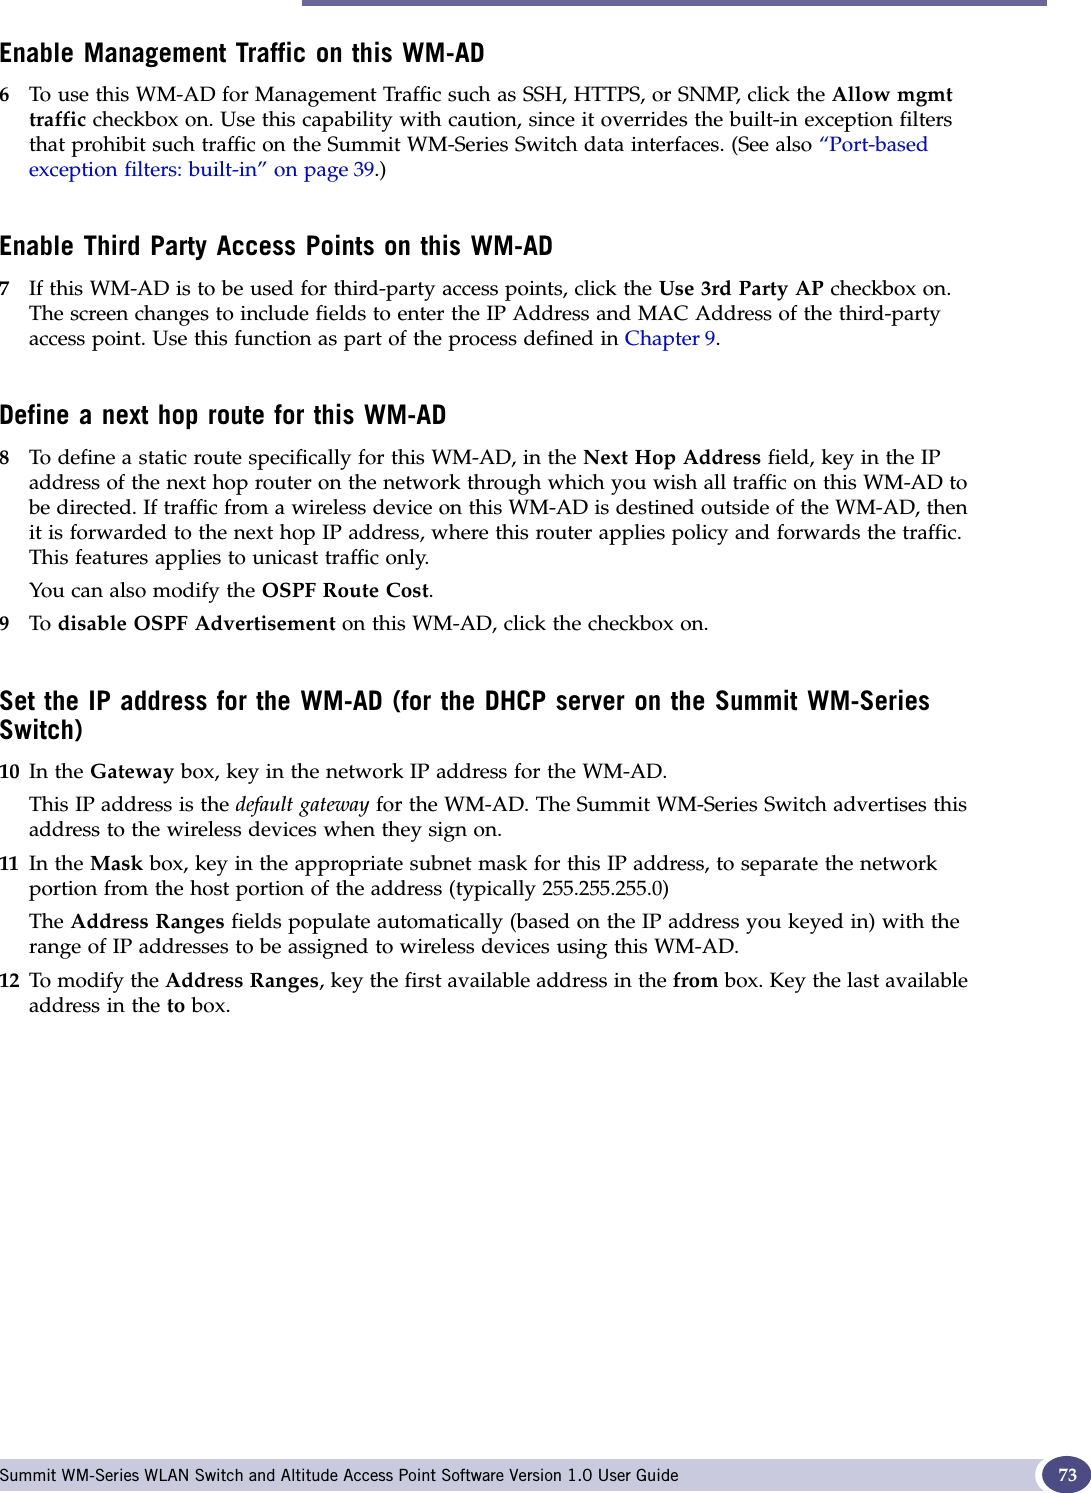 Topology for a WM-AD Summit WM-Series WLAN Switch and Altitude Access Point Software Version 1.0 User Guide 73Enable Management Traffic on this WM-AD6To use this WM-AD for Management Traffic such as SSH, HTTPS, or SNMP, click the Allow mgmt traffic checkbox on. Use this capability with caution, since it overrides the built-in exception filters that prohibit such traffic on the Summit WM-Series Switch data interfaces. (See also “Port-basedexception filters: built-in” on page 39.)Enable Third Party Access Points on this WM-AD7If this WM-AD is to be used for third-party access points, click the Use 3rd Party AP checkbox on. The screen changes to include fields to enter the IP Address and MAC Address of the third-party access point. Use this function as part of the process defined in Chapter 9.Define a next hop route for this WM-AD8To define a static route specifically for this WM-AD, in the Next Hop Address field, key in the IP address of the next hop router on the network through which you wish all traffic on this WM-AD to be directed. If traffic from a wireless device on this WM-AD is destined outside of the WM-AD, then it is forwarded to the next hop IP address, where this router applies policy and forwards the traffic. This features applies to unicast traffic only.You can also modify the OSPF Route Cost.9To  disable OSPF Advertisement on this WM-AD, click the checkbox on.Set the IP address for the WM-AD (for the DHCP server on the Summit WM-Series Switch)10 In the Gateway box, key in the network IP address for the WM-AD. This IP address is the default gateway for the WM-AD. The Summit WM-Series Switch advertises this address to the wireless devices when they sign on. 11 In the Mask box, key in the appropriate subnet mask for this IP address, to separate the network portion from the host portion of the address (typically 255.255.255.0)The Address Ranges fields populate automatically (based on the IP address you keyed in) with the range of IP addresses to be assigned to wireless devices using this WM-AD.12 To modify the Address Ranges, key the first available address in the from box. Key the last available address in the to box. 